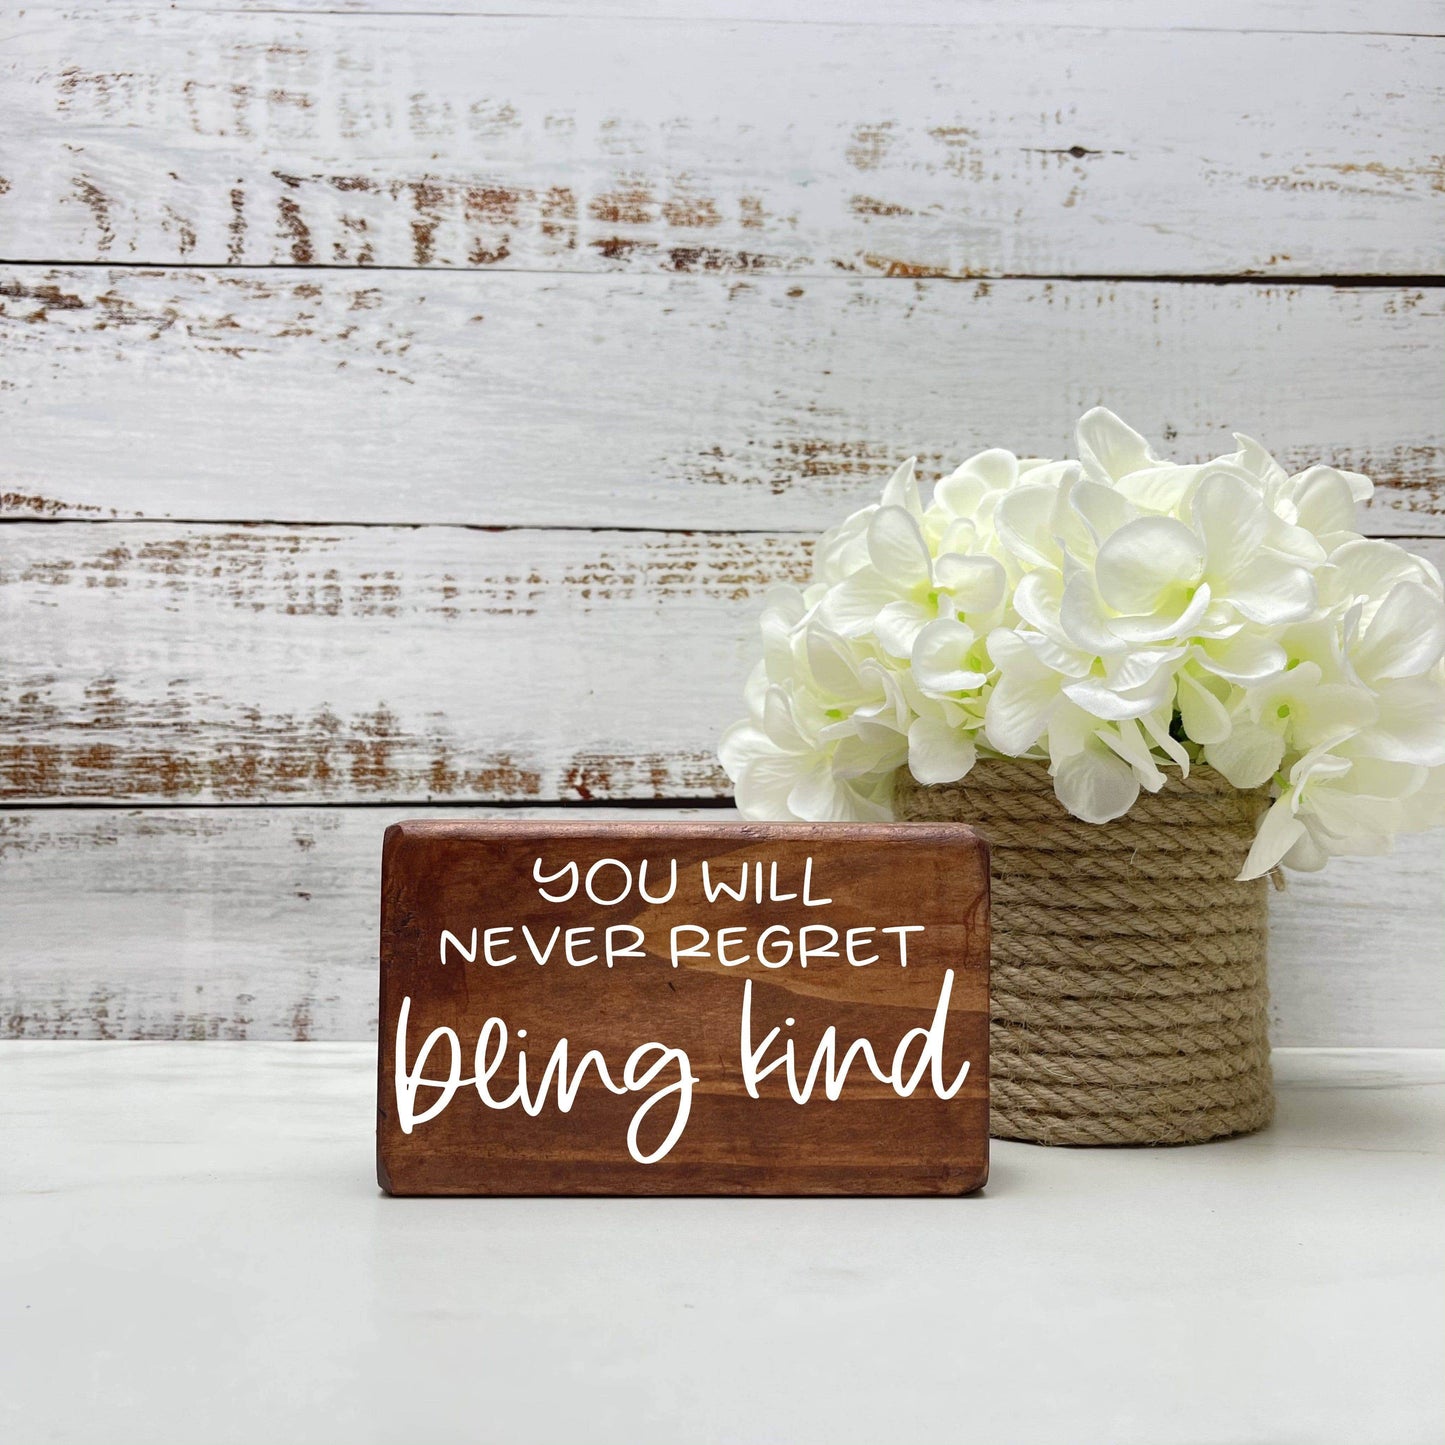 You will never regret being Kind wood sign, quote sign, rustic decor, home decor